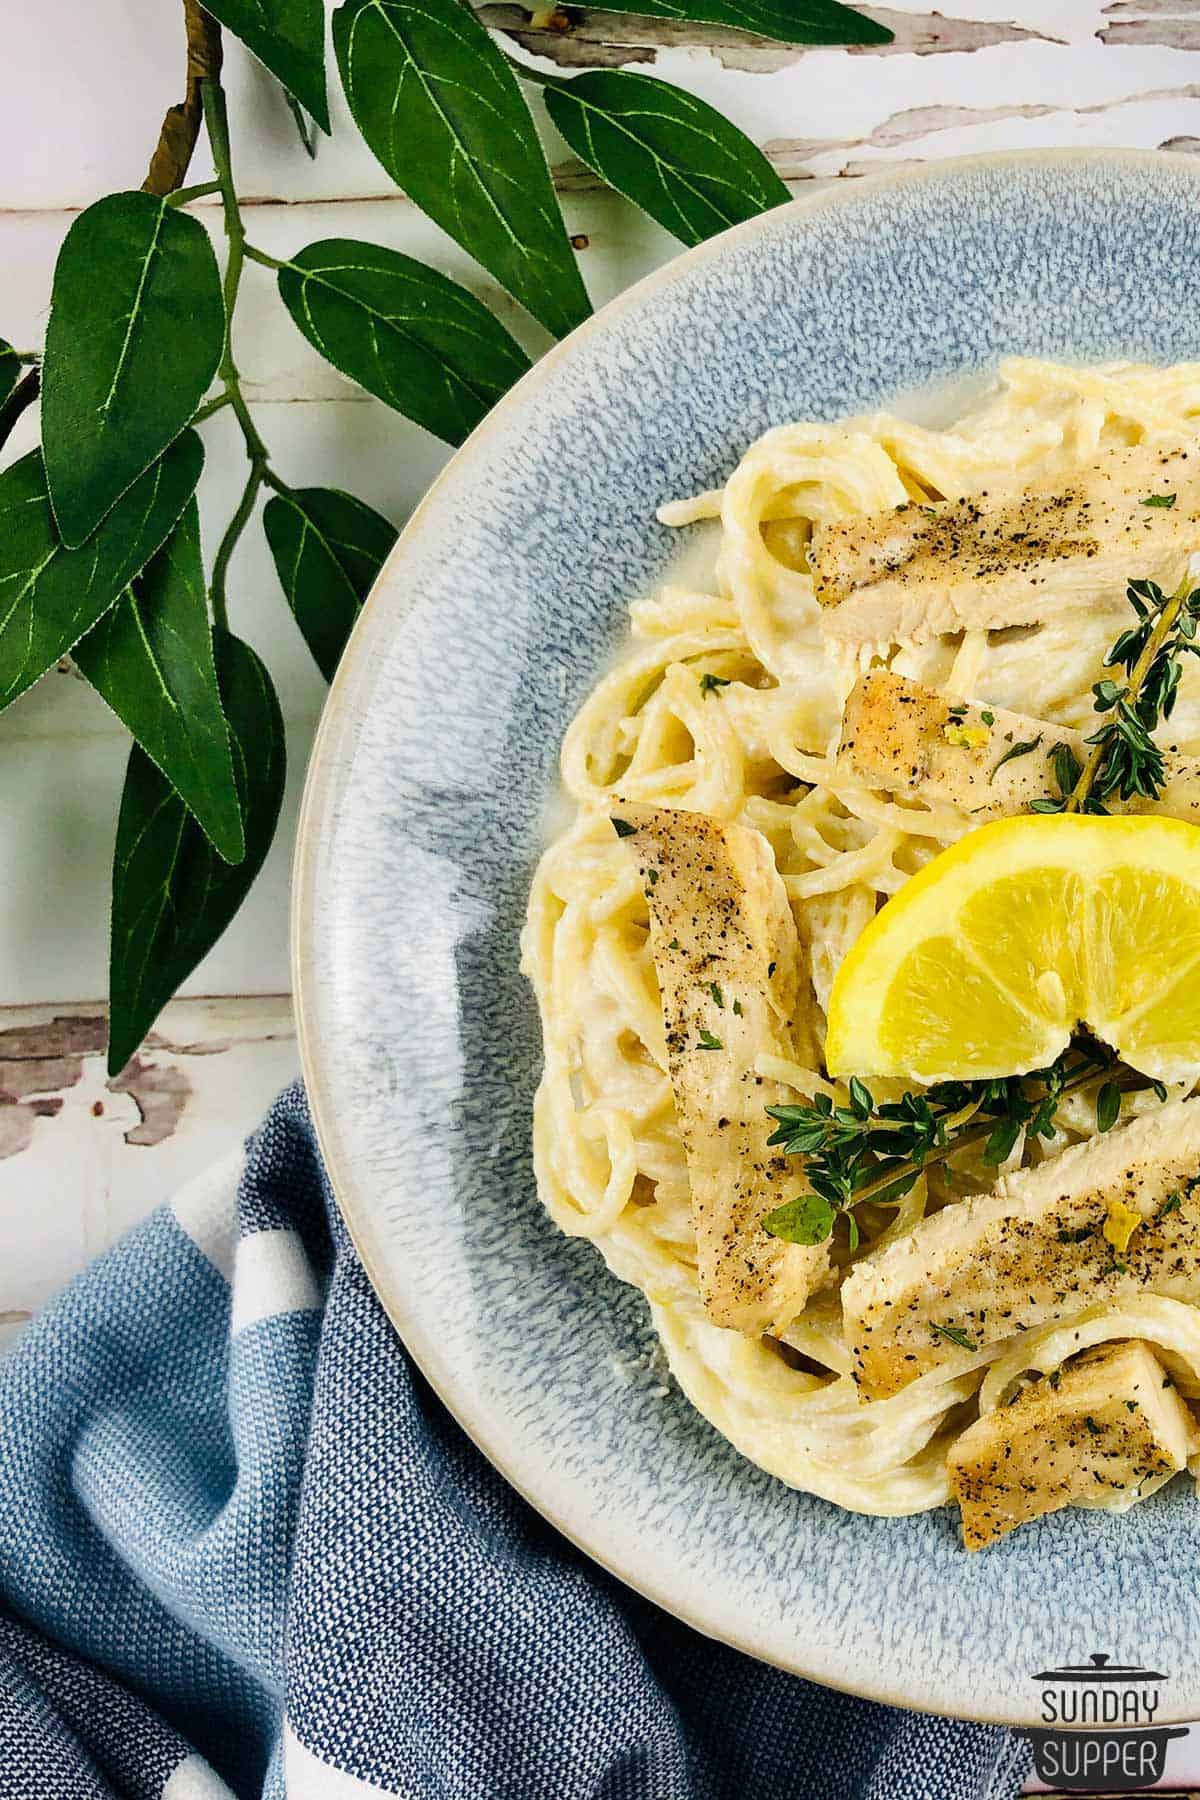 completed lemon ricotta pasta with chicken in a blue bowl with a serving towel and a plant